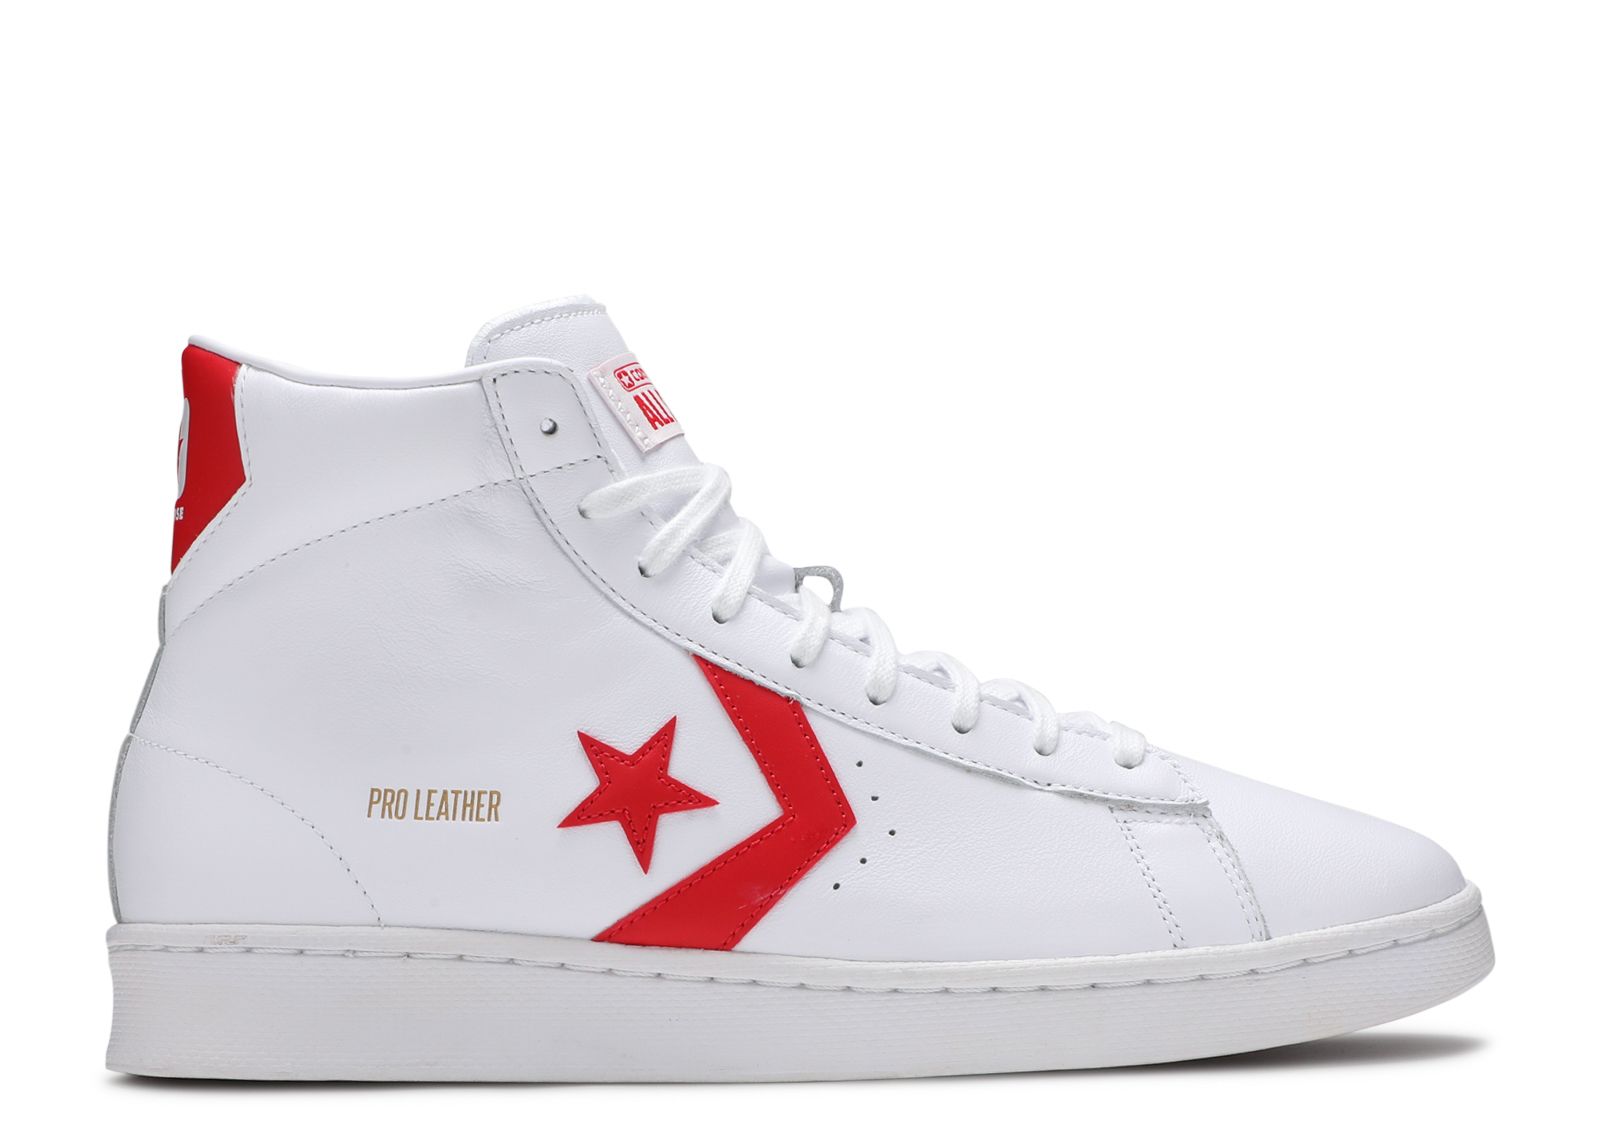 Pro Leather Mid 'Then & Now' - Converse - 168131C - white/red | Flight Club